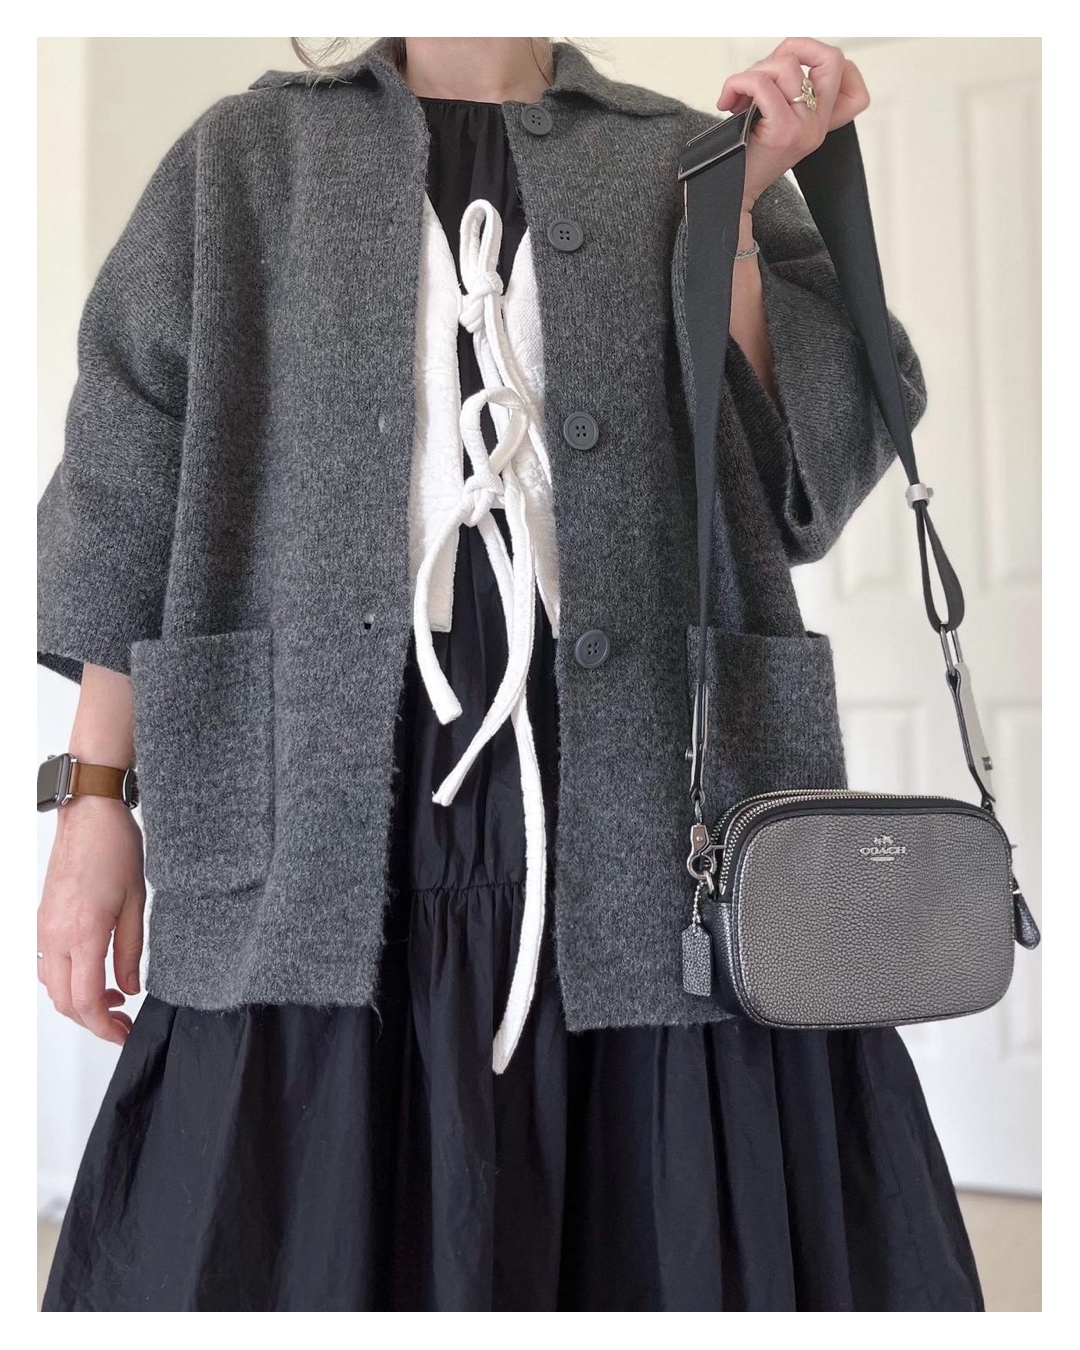 A small white woman is wearing the cardigan before the upcycle over a white vest with front ties and a midi length black dress. She is holding a silver handbag. The photo is from the woman's shoulders to her knees.